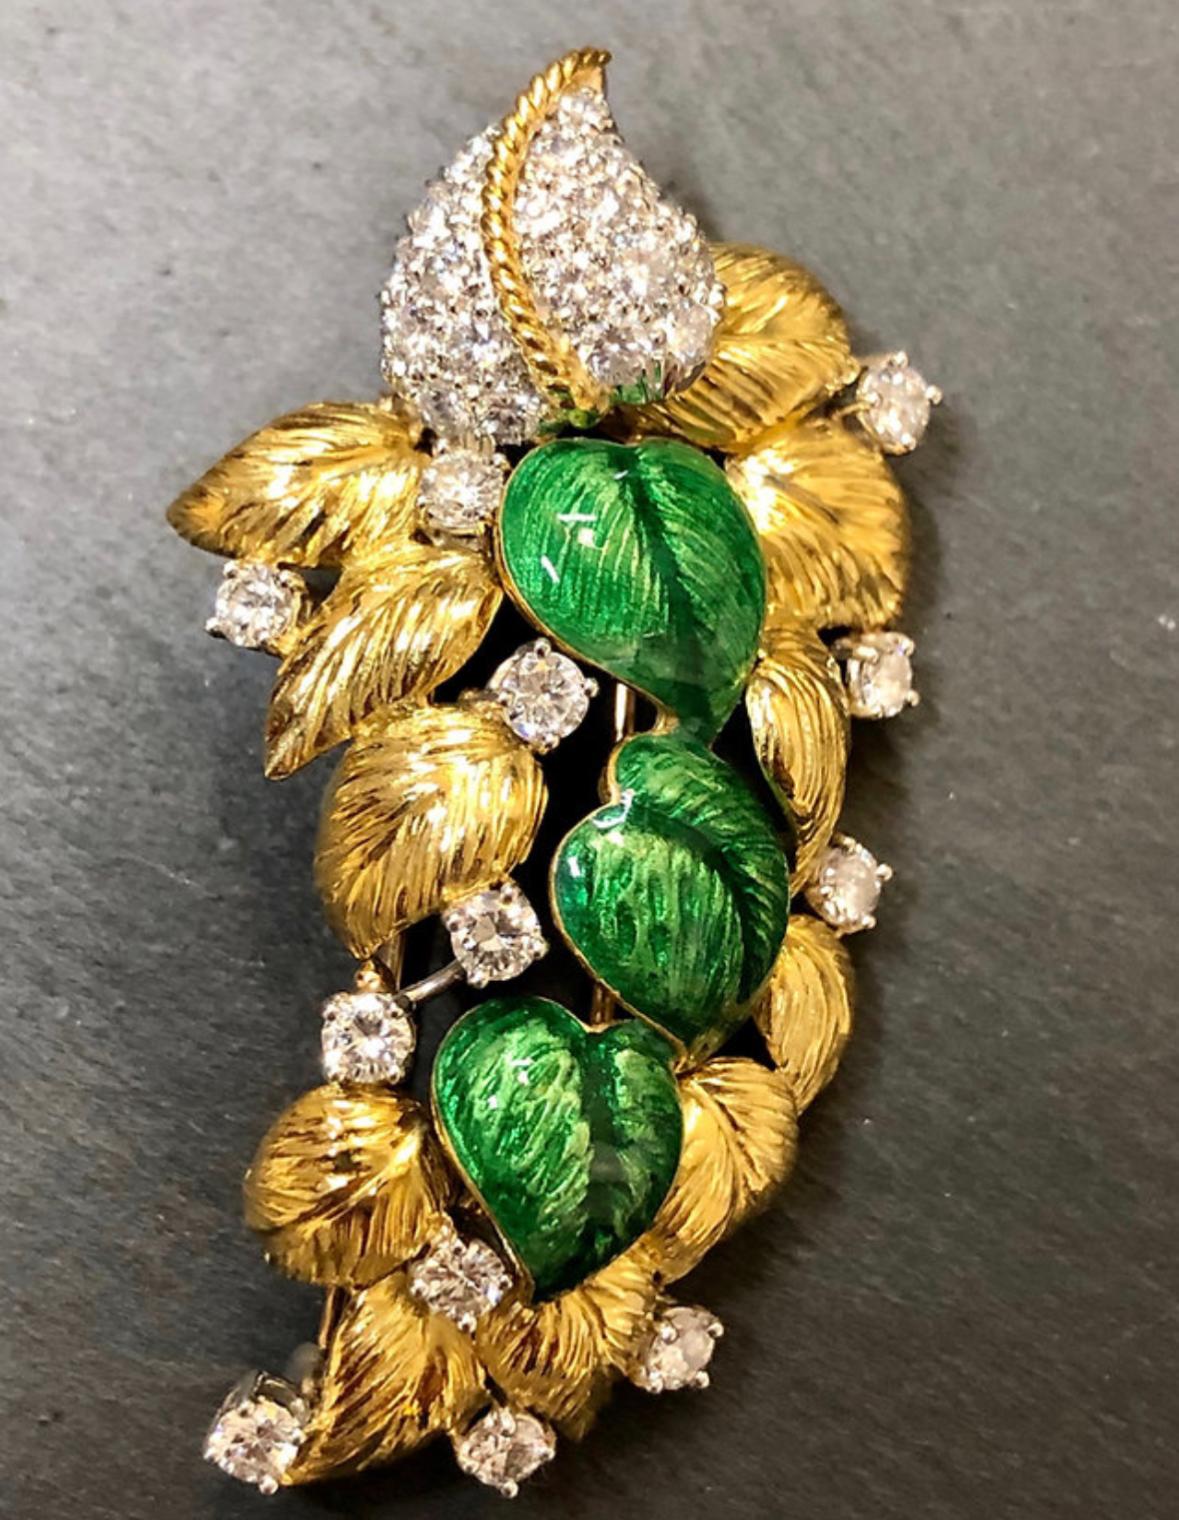 Brooch circa 1960’s done in 18K yellow gold and platinum set with approximately 2.50cttw in F-G color Vs1-Si2 clarity larger prong set and pave diamonds finished in beautiful green enamel.

Dimensions/Weight
2.10” long by 1.10” at its widest point.